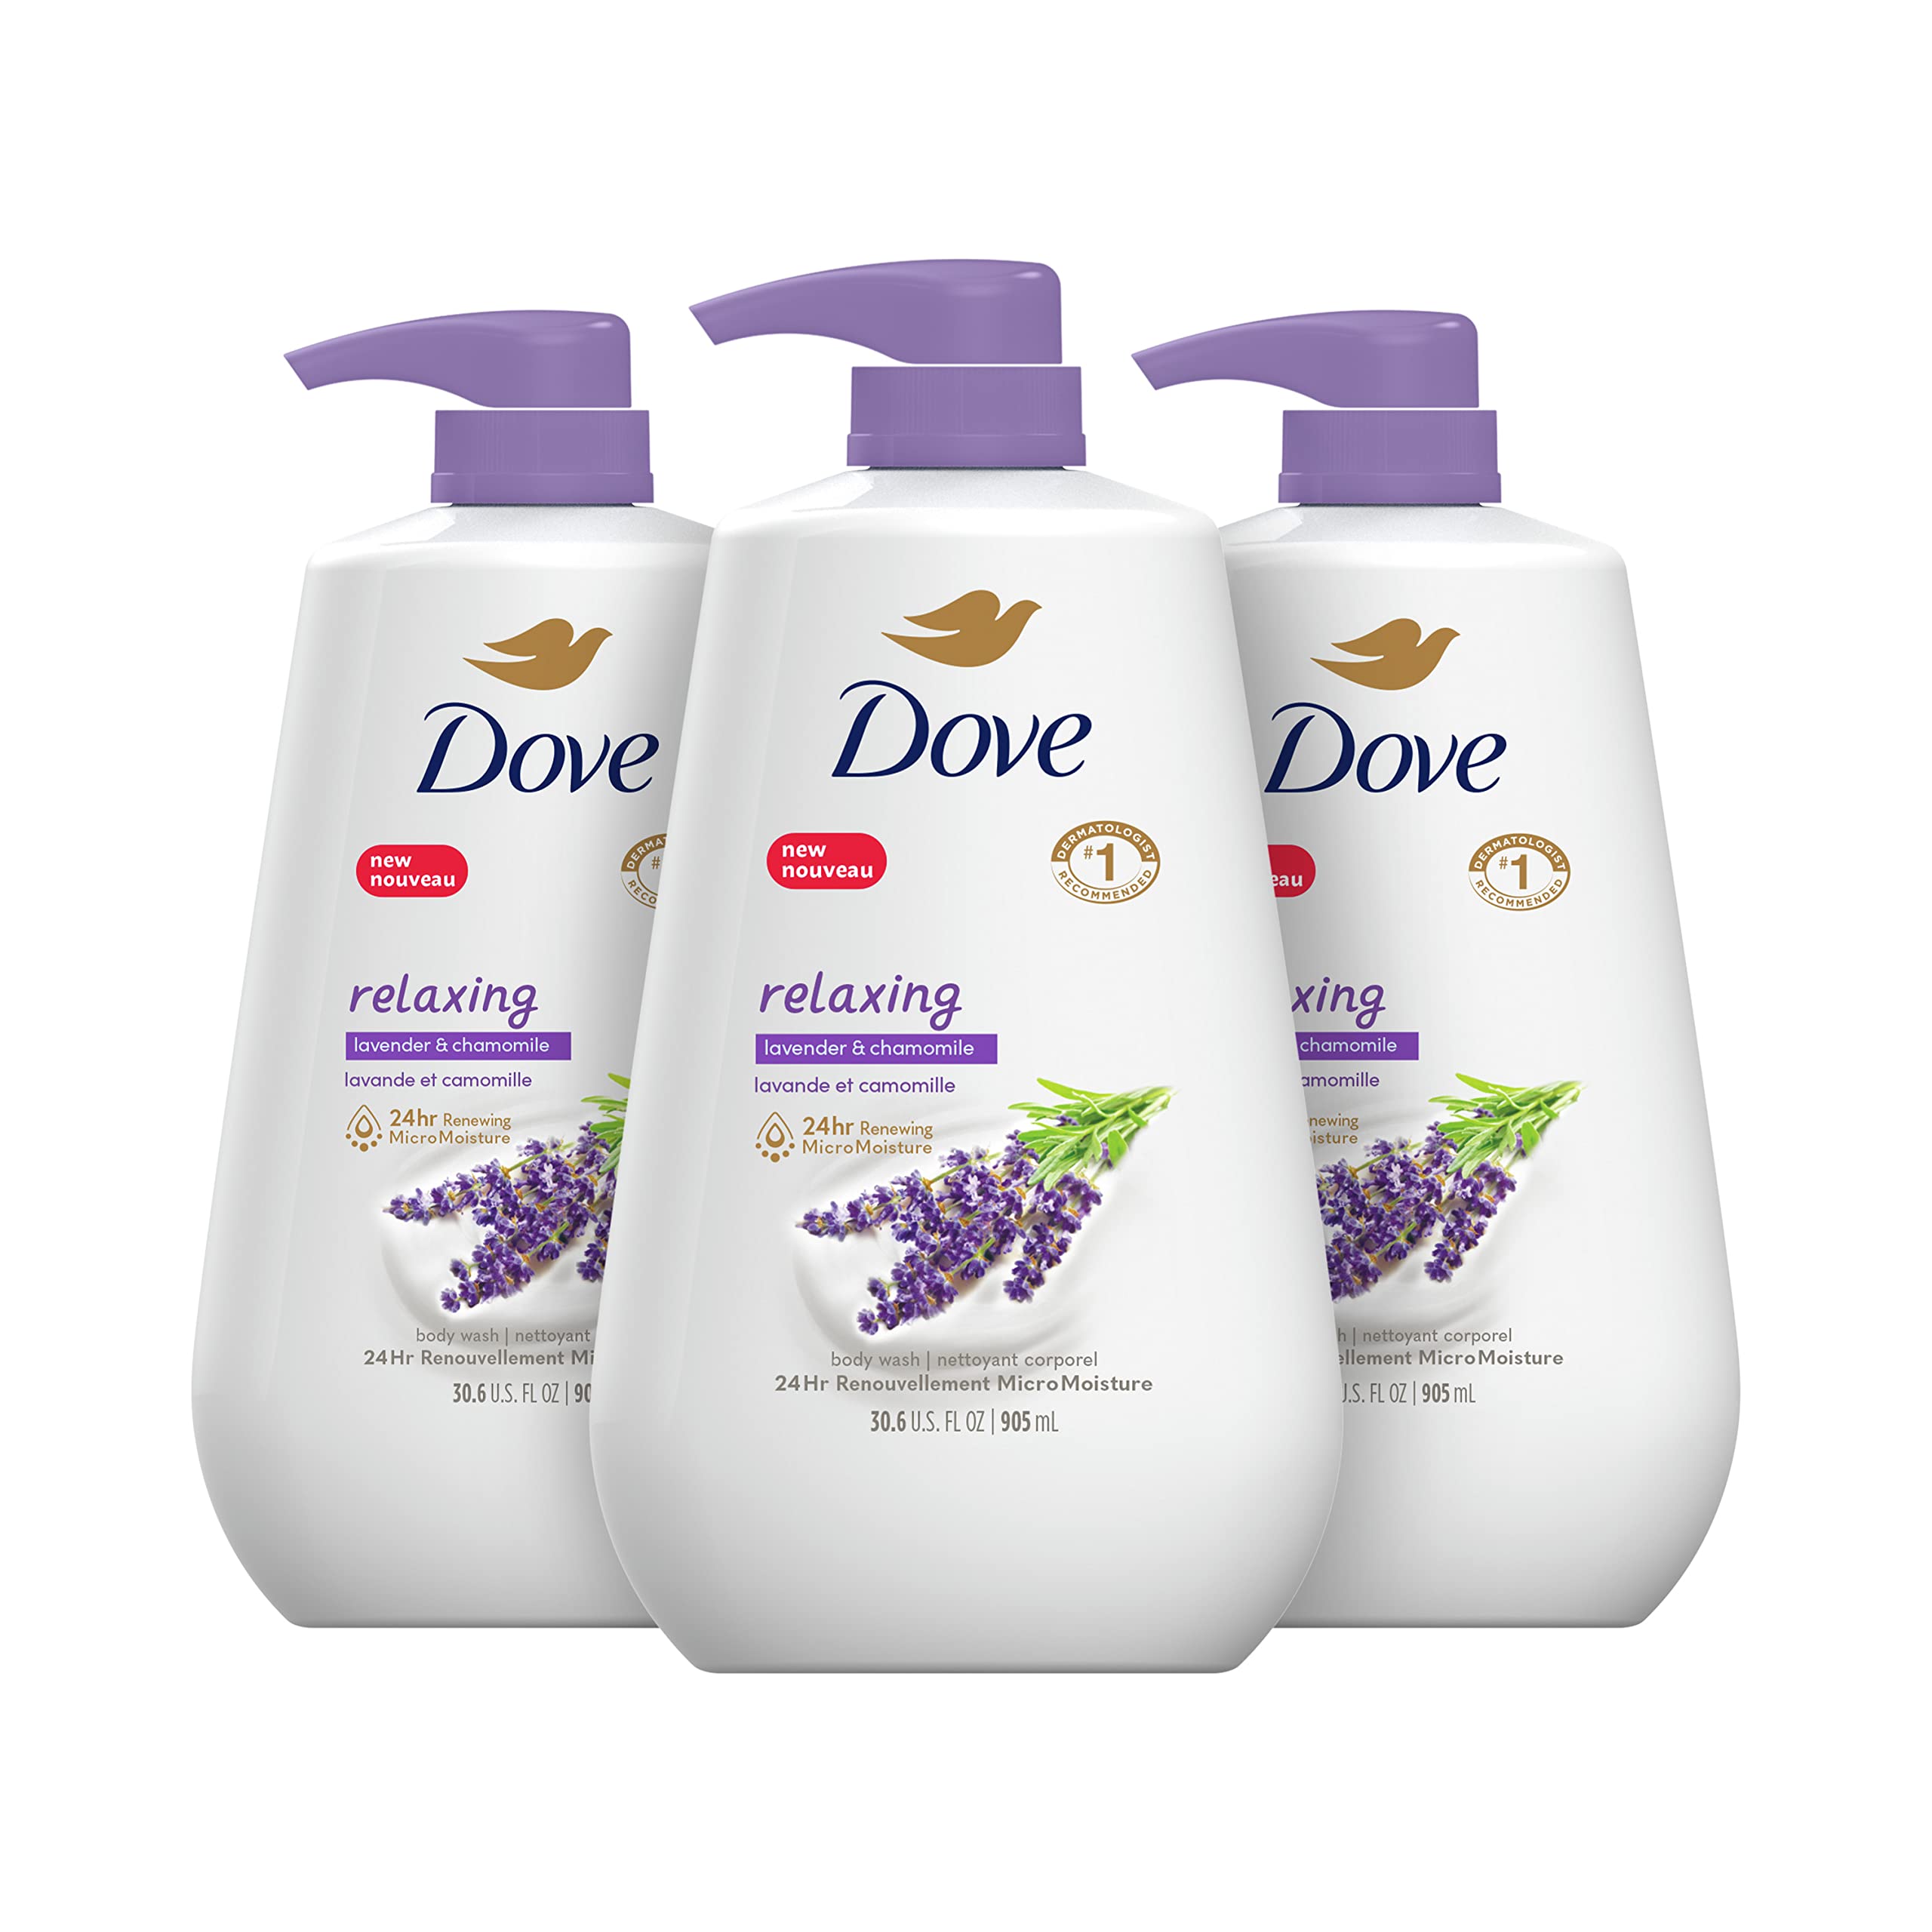 Dove Body Wash with Pump Relaxing Lavender Oil & Chamomile 3 Count for Renewed, Healthy-Looking Skin Gentle Skin Cleanser with 24hr Renewing MicroMoisture 30.6 oz